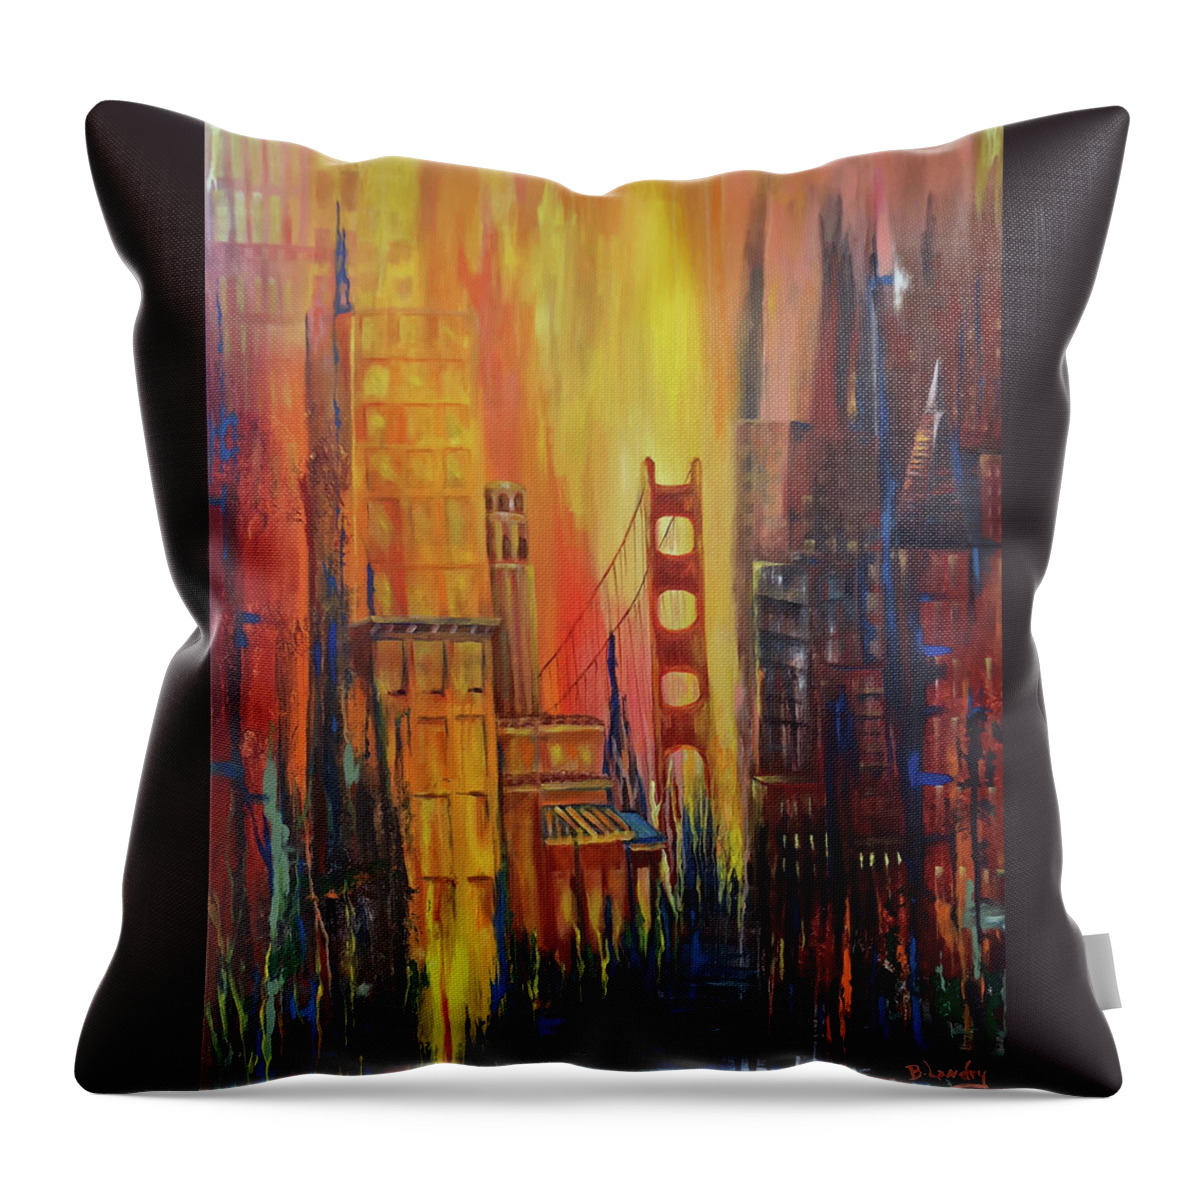 City Throw Pillow featuring the painting San Francisco Abstraction by Barbara Landry